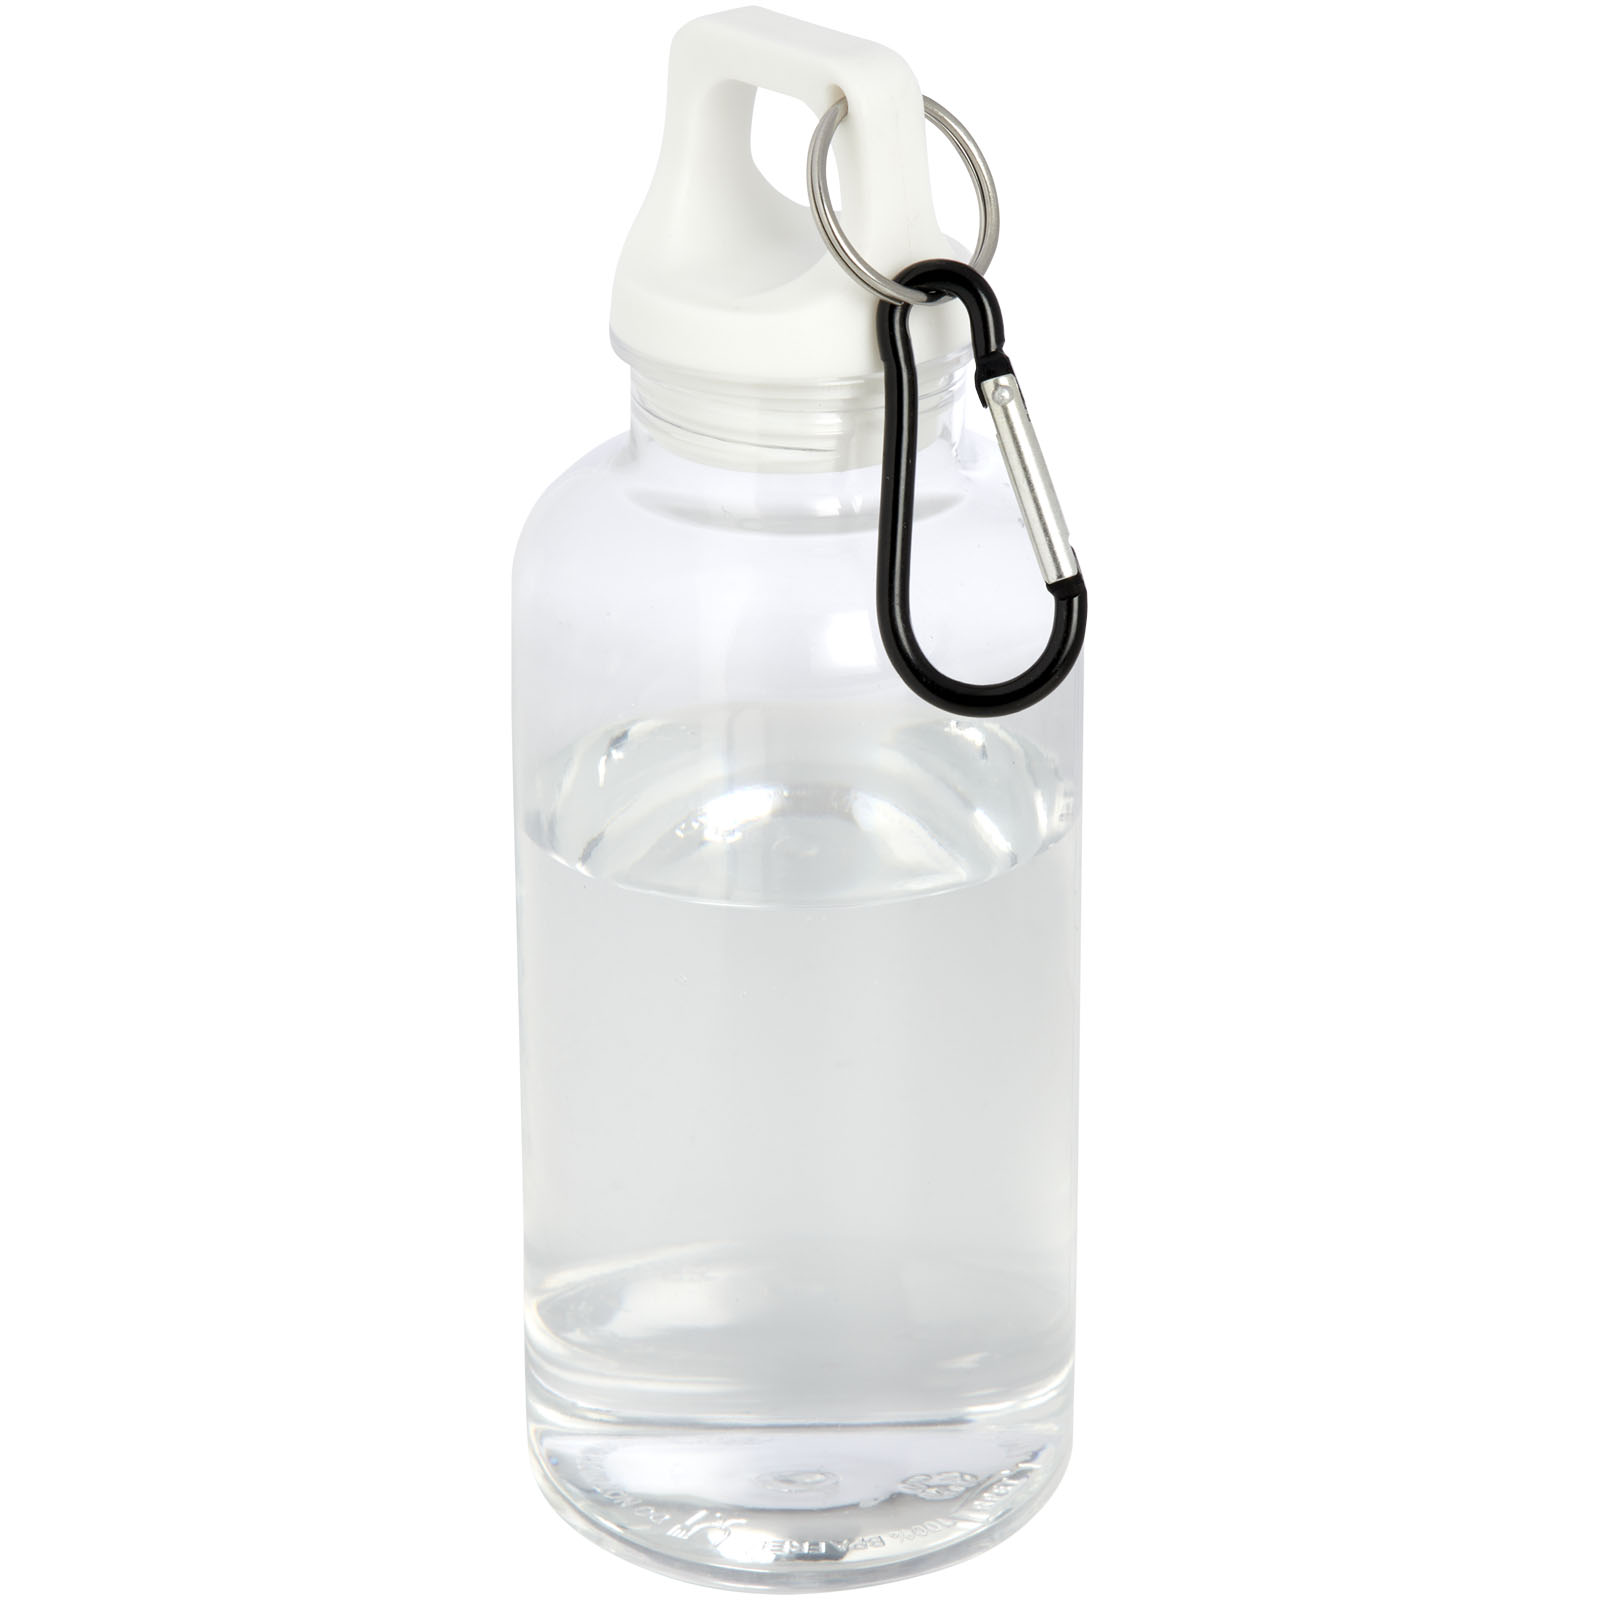 Advertising Water bottles - Oregon 400 ml RCS certified recycled plastic water bottle with carabiner